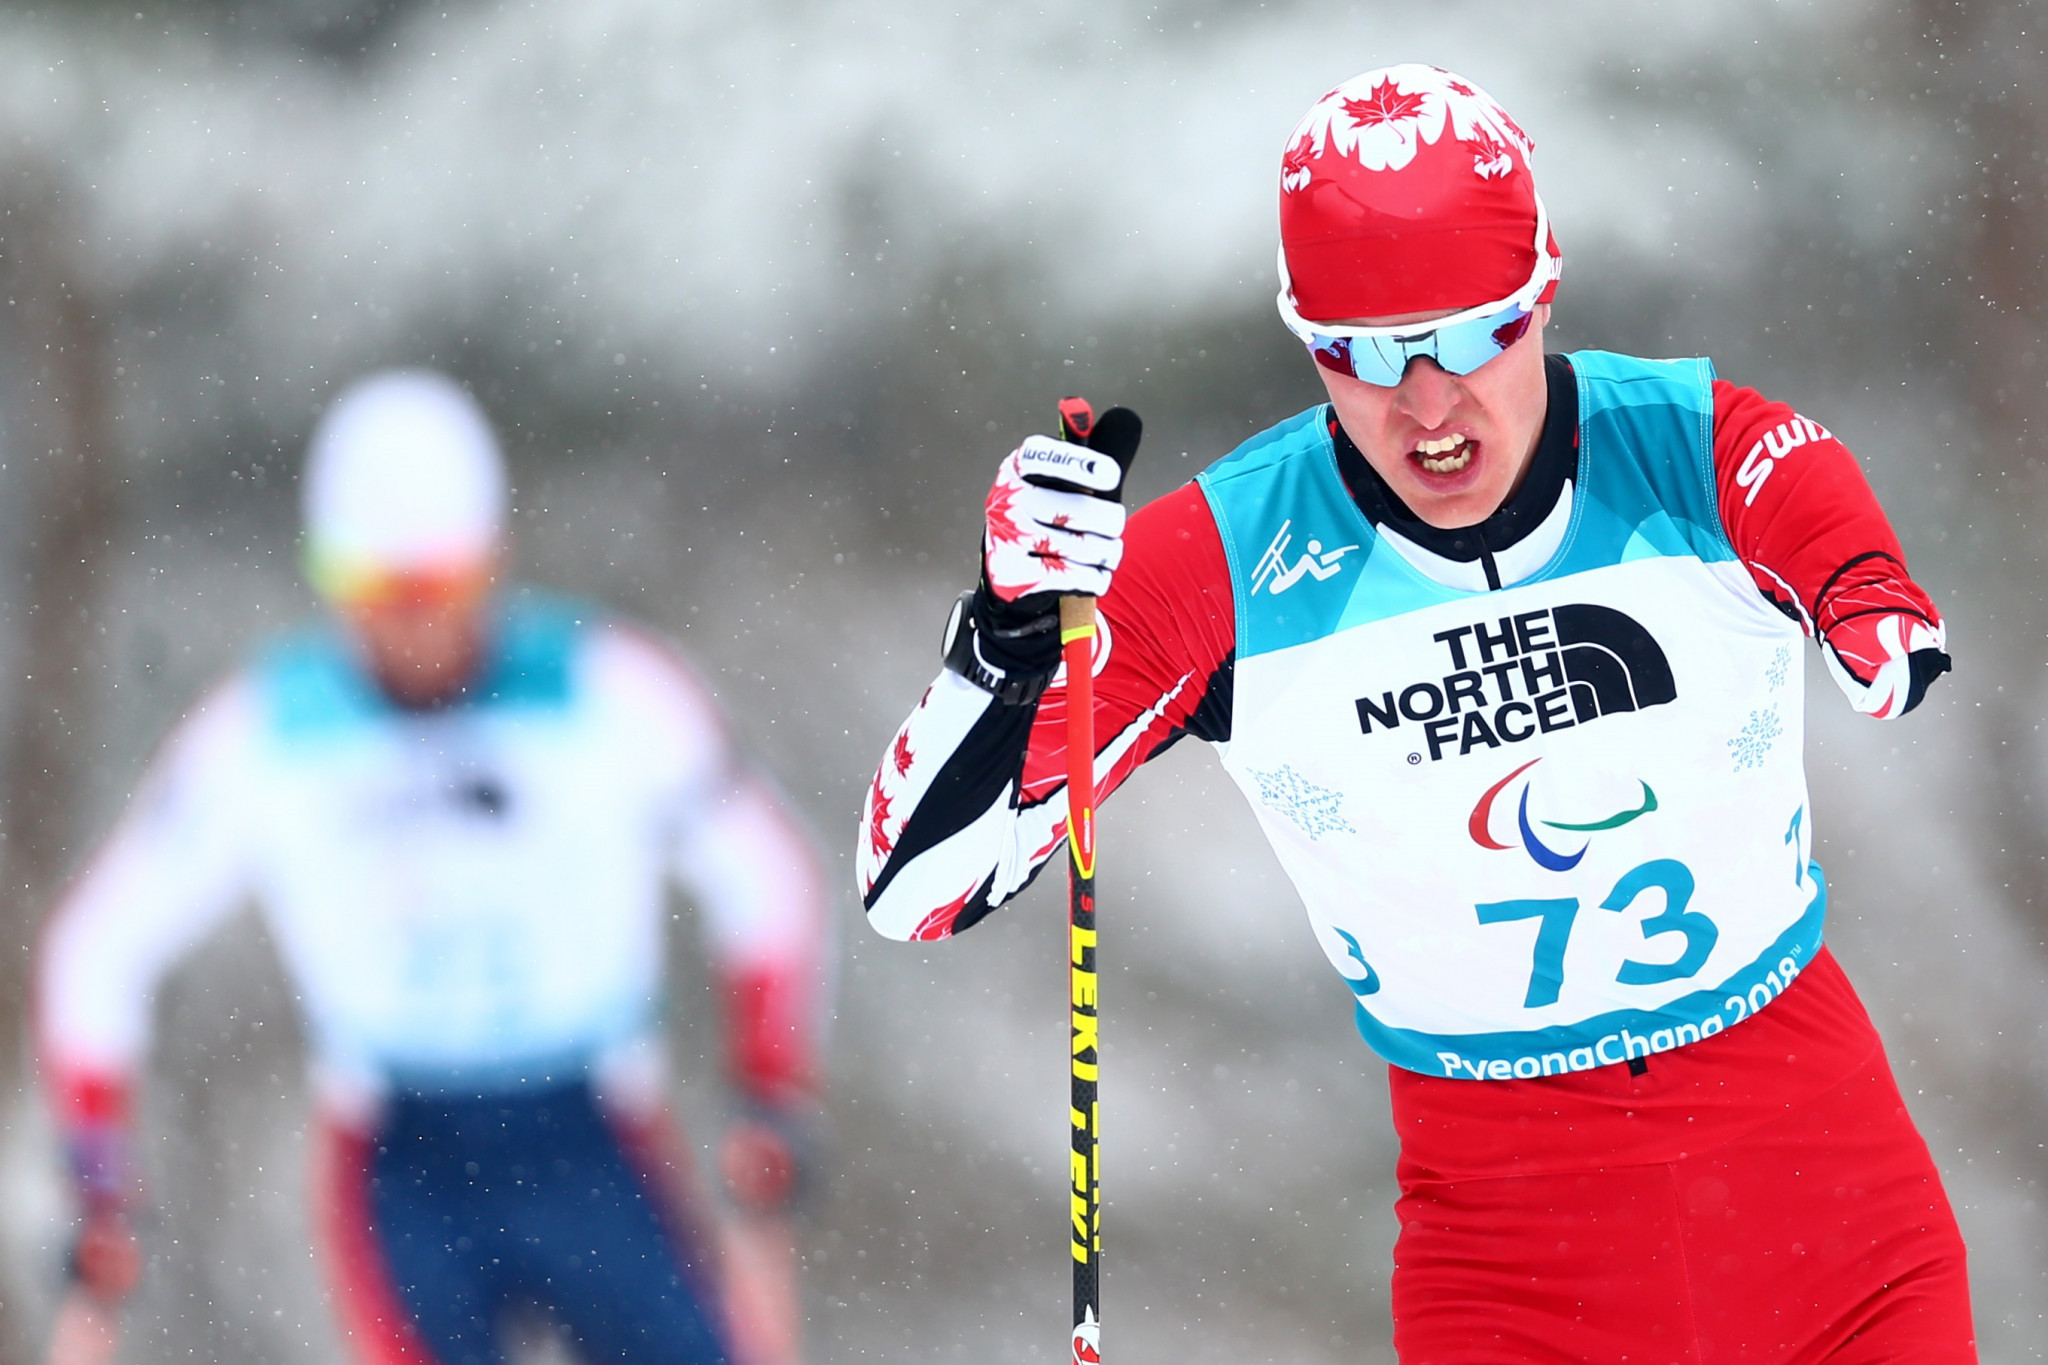 Canada's Mark Arendz tasted victory in the men's 15km standing event ©Getty Images